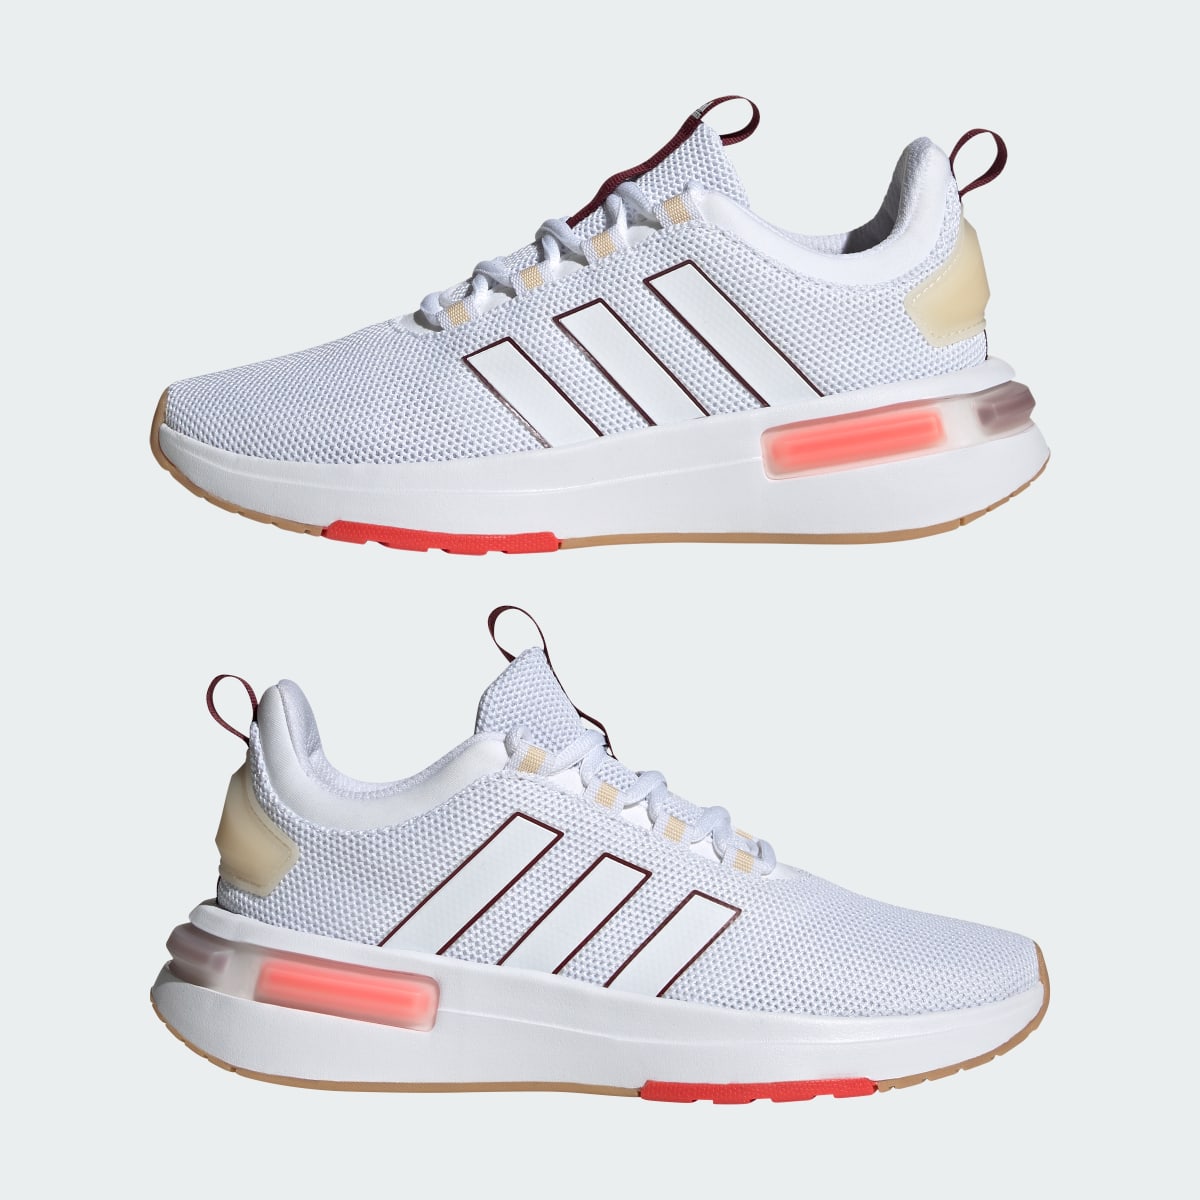 Adidas Racer TR23 Shoes. 11